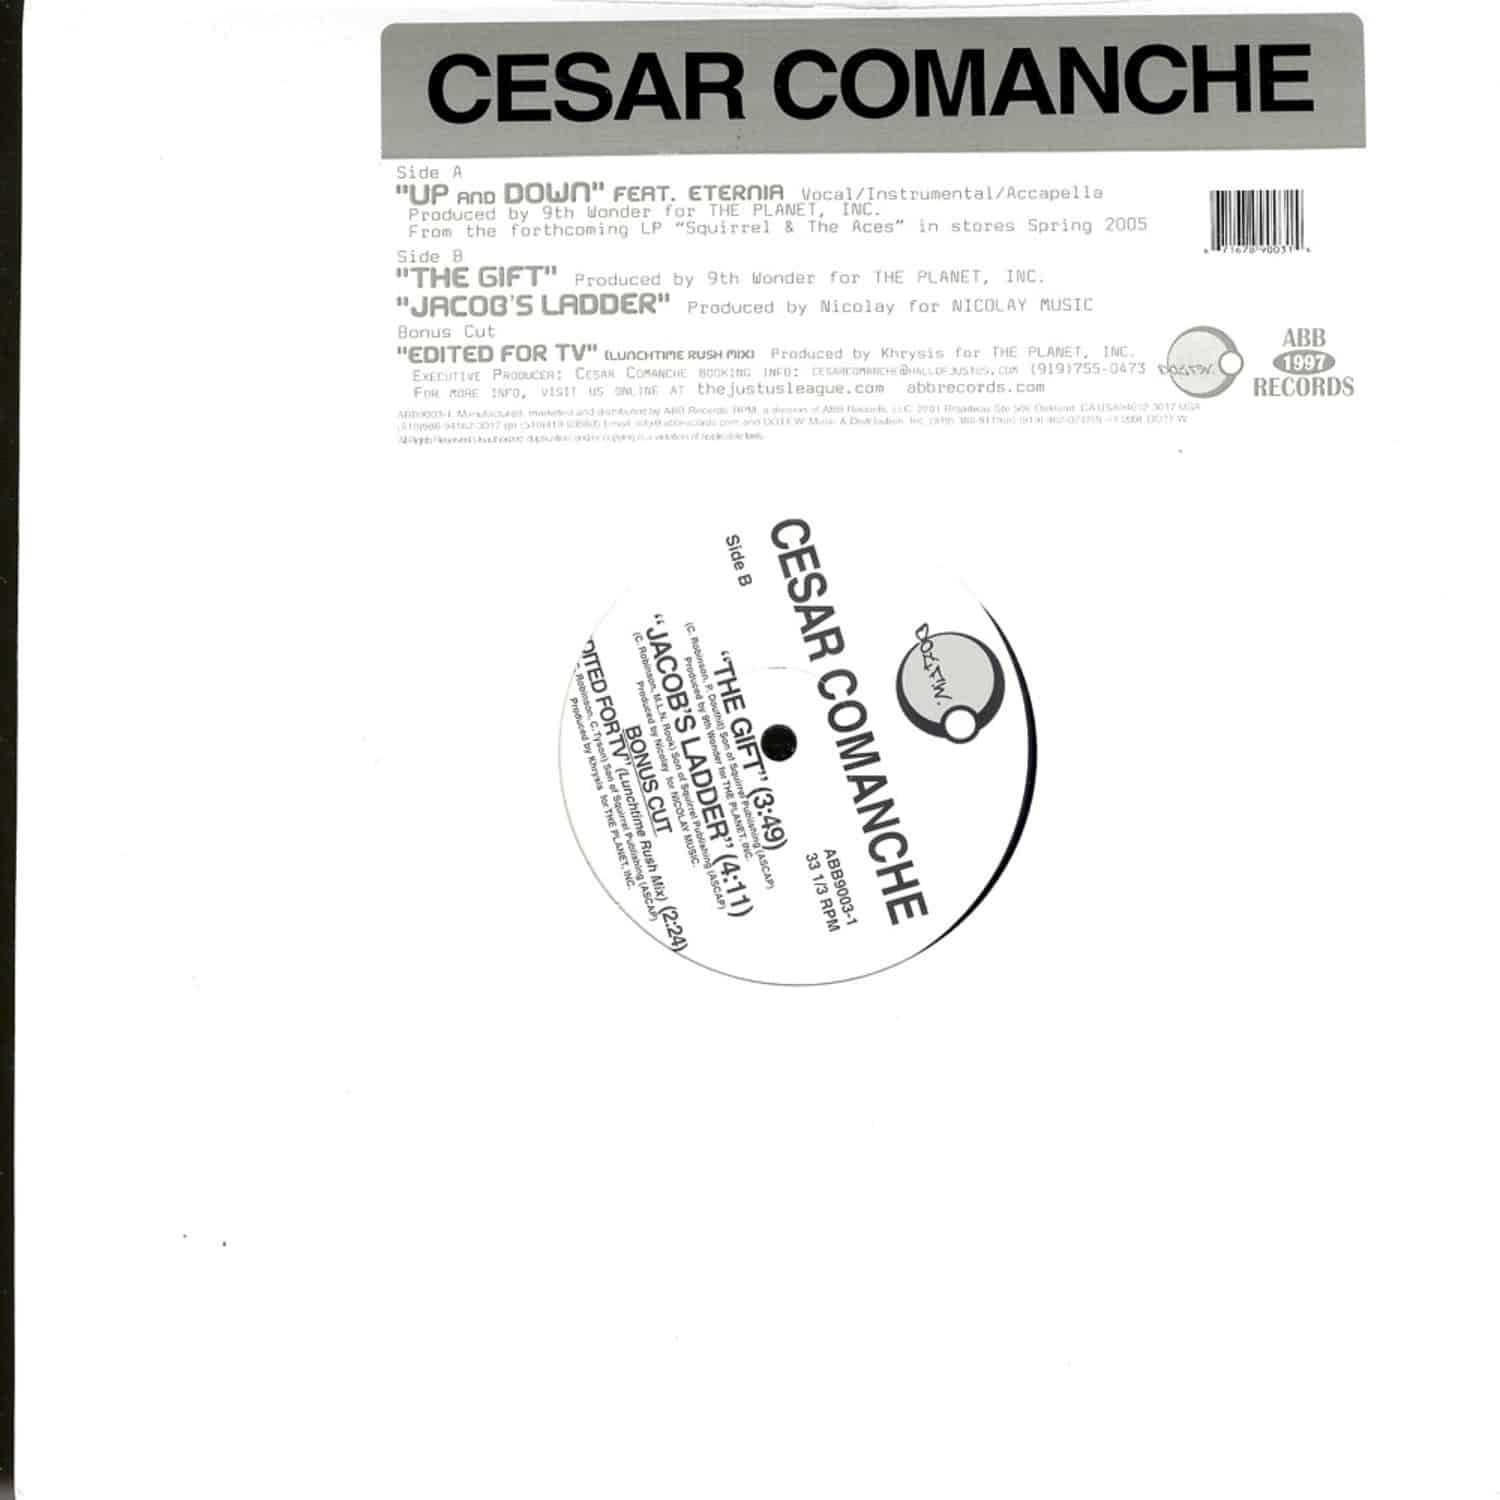 Cesar Comanche - UP AND DOWN